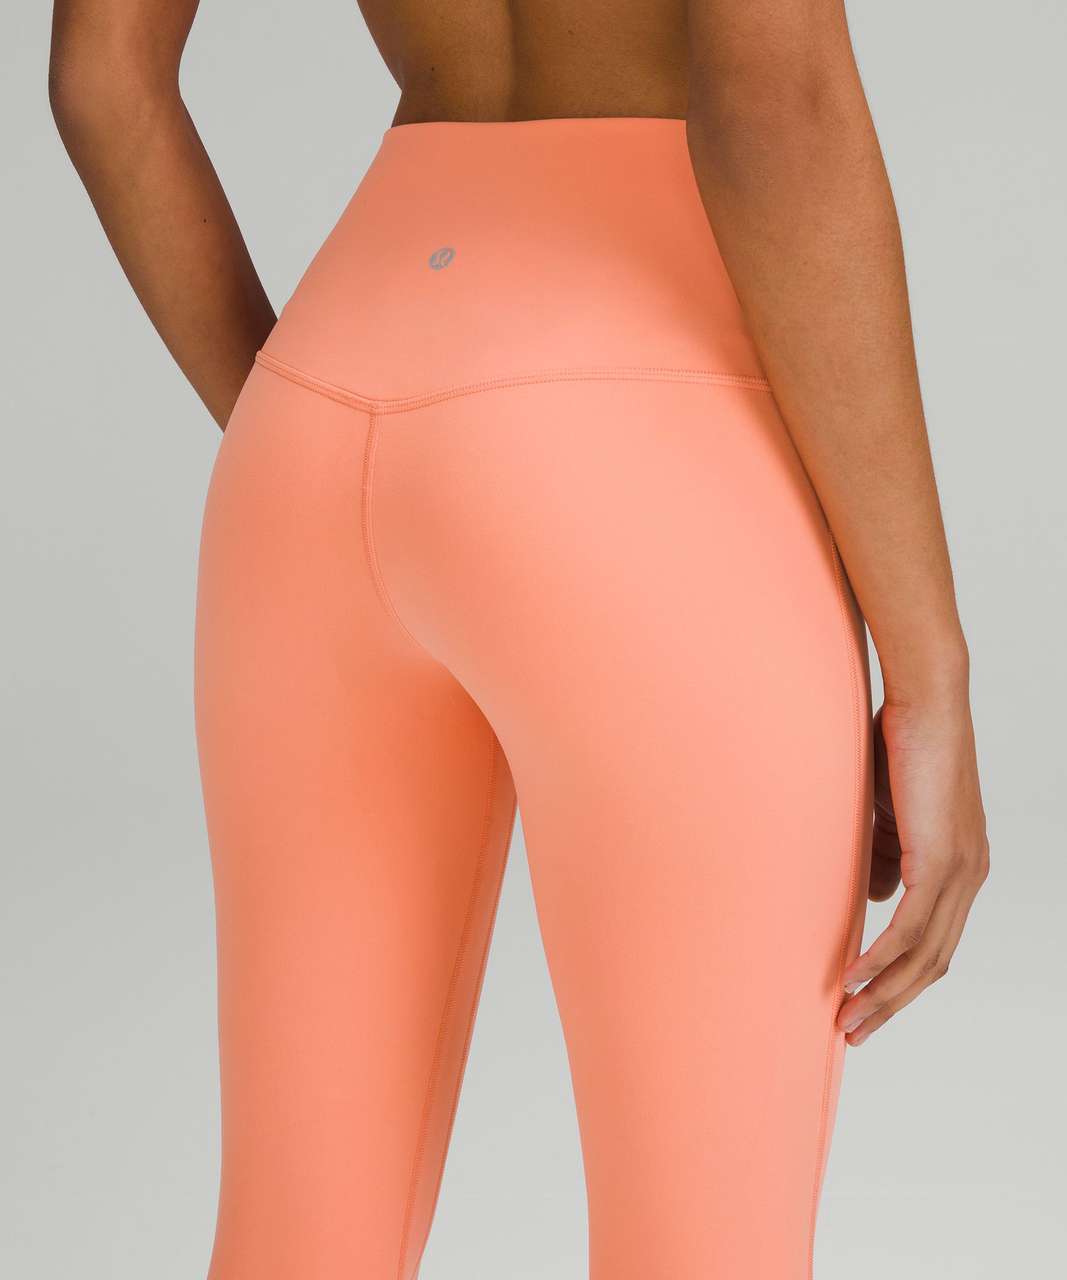 Lululemon Align High-Rise Pant 25" - Sunny Coral